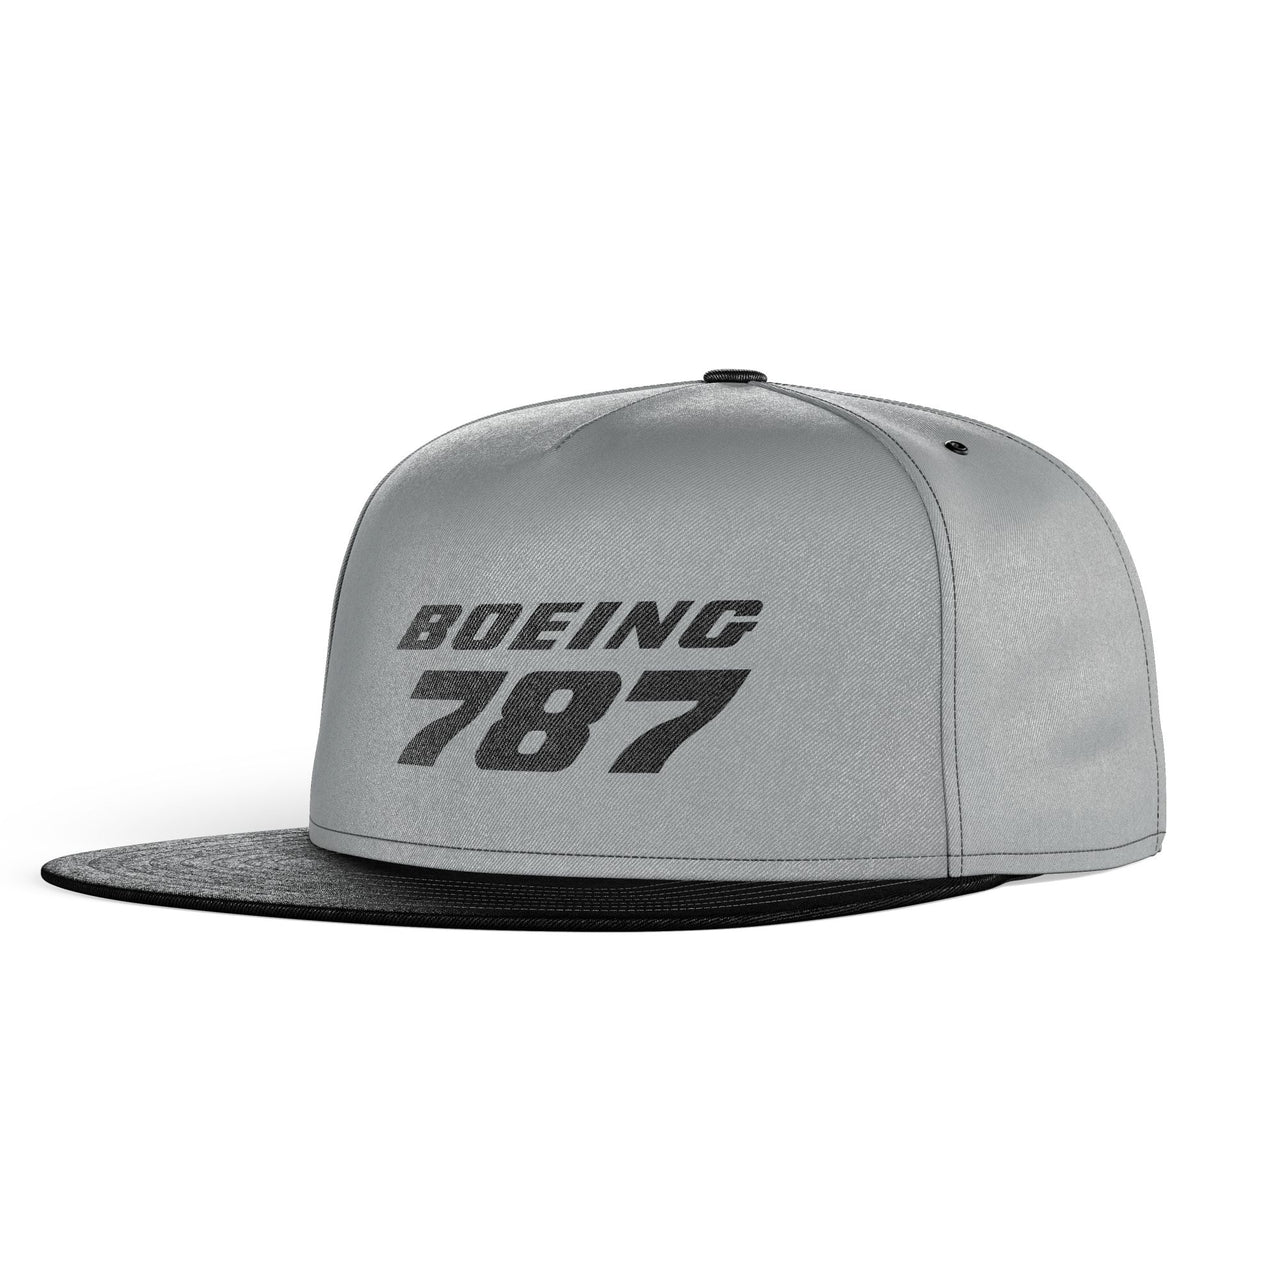 Boeing 787 & Text Designed Snapback Caps & Hats